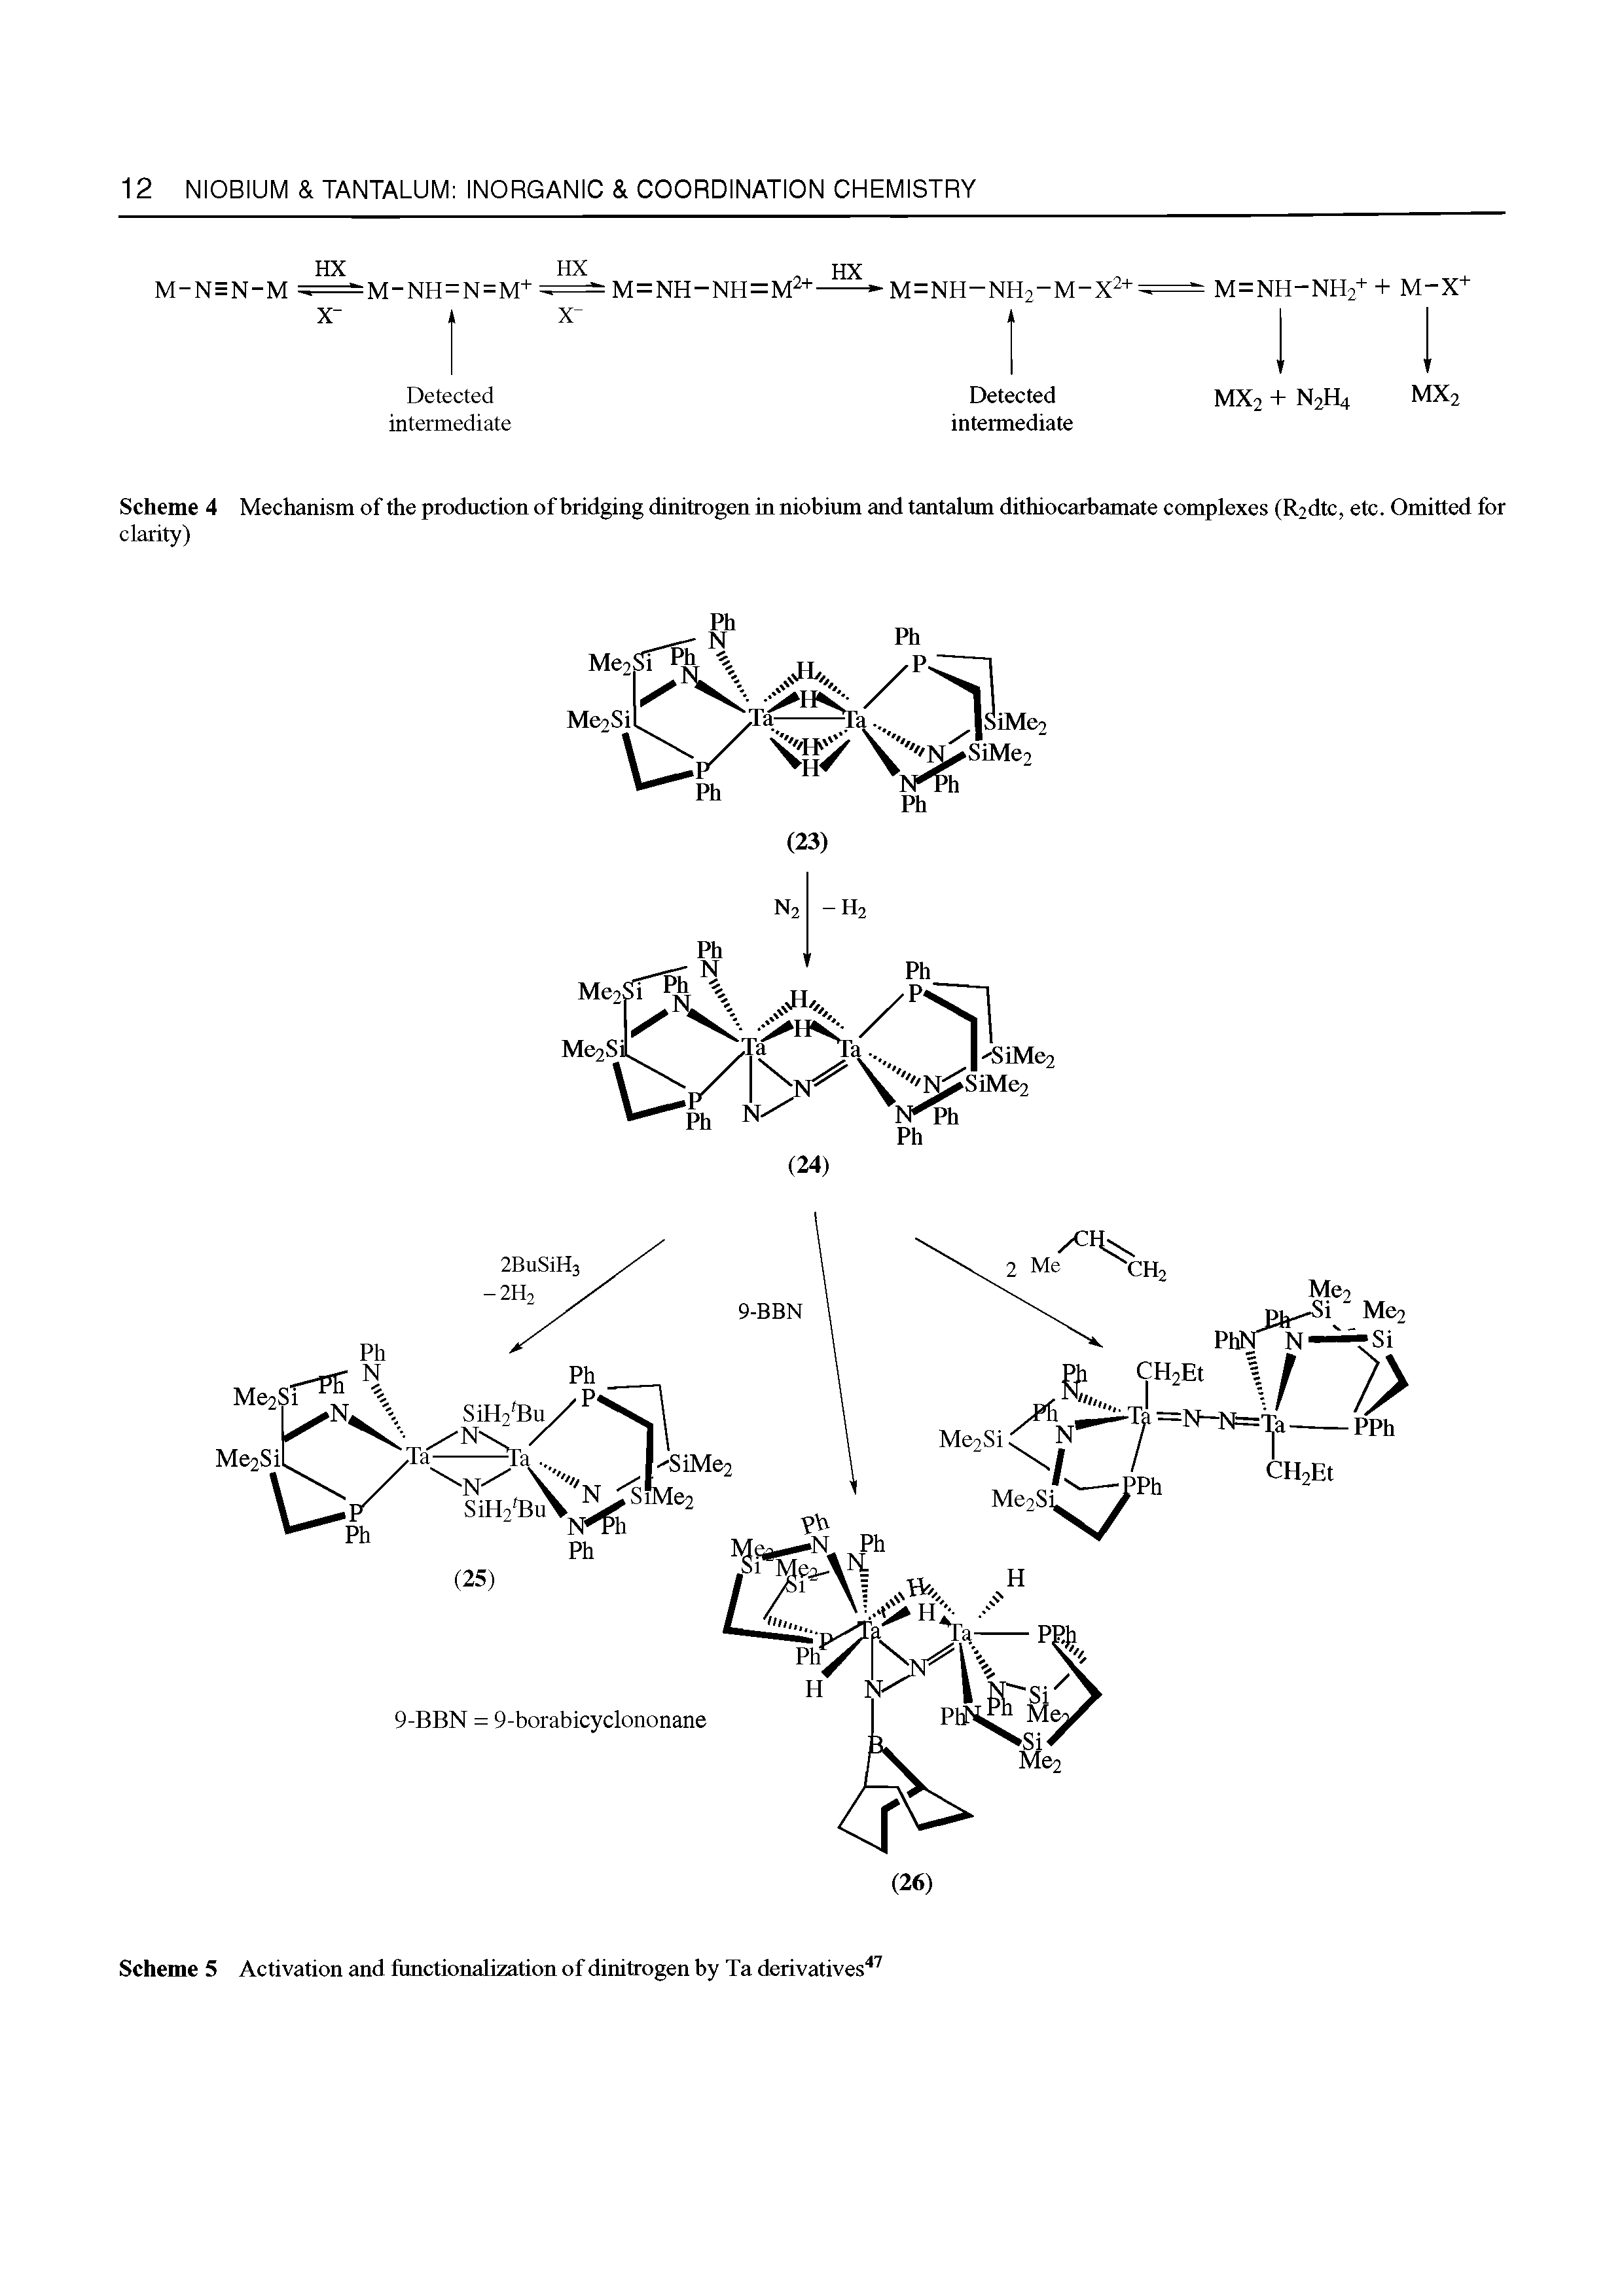 Scheme 4 Mechanism of the production of bridging dinitrogen in niobium and tantalum dithiocarbamate complexes (R2dtc, etc. Omitted for clarity)...